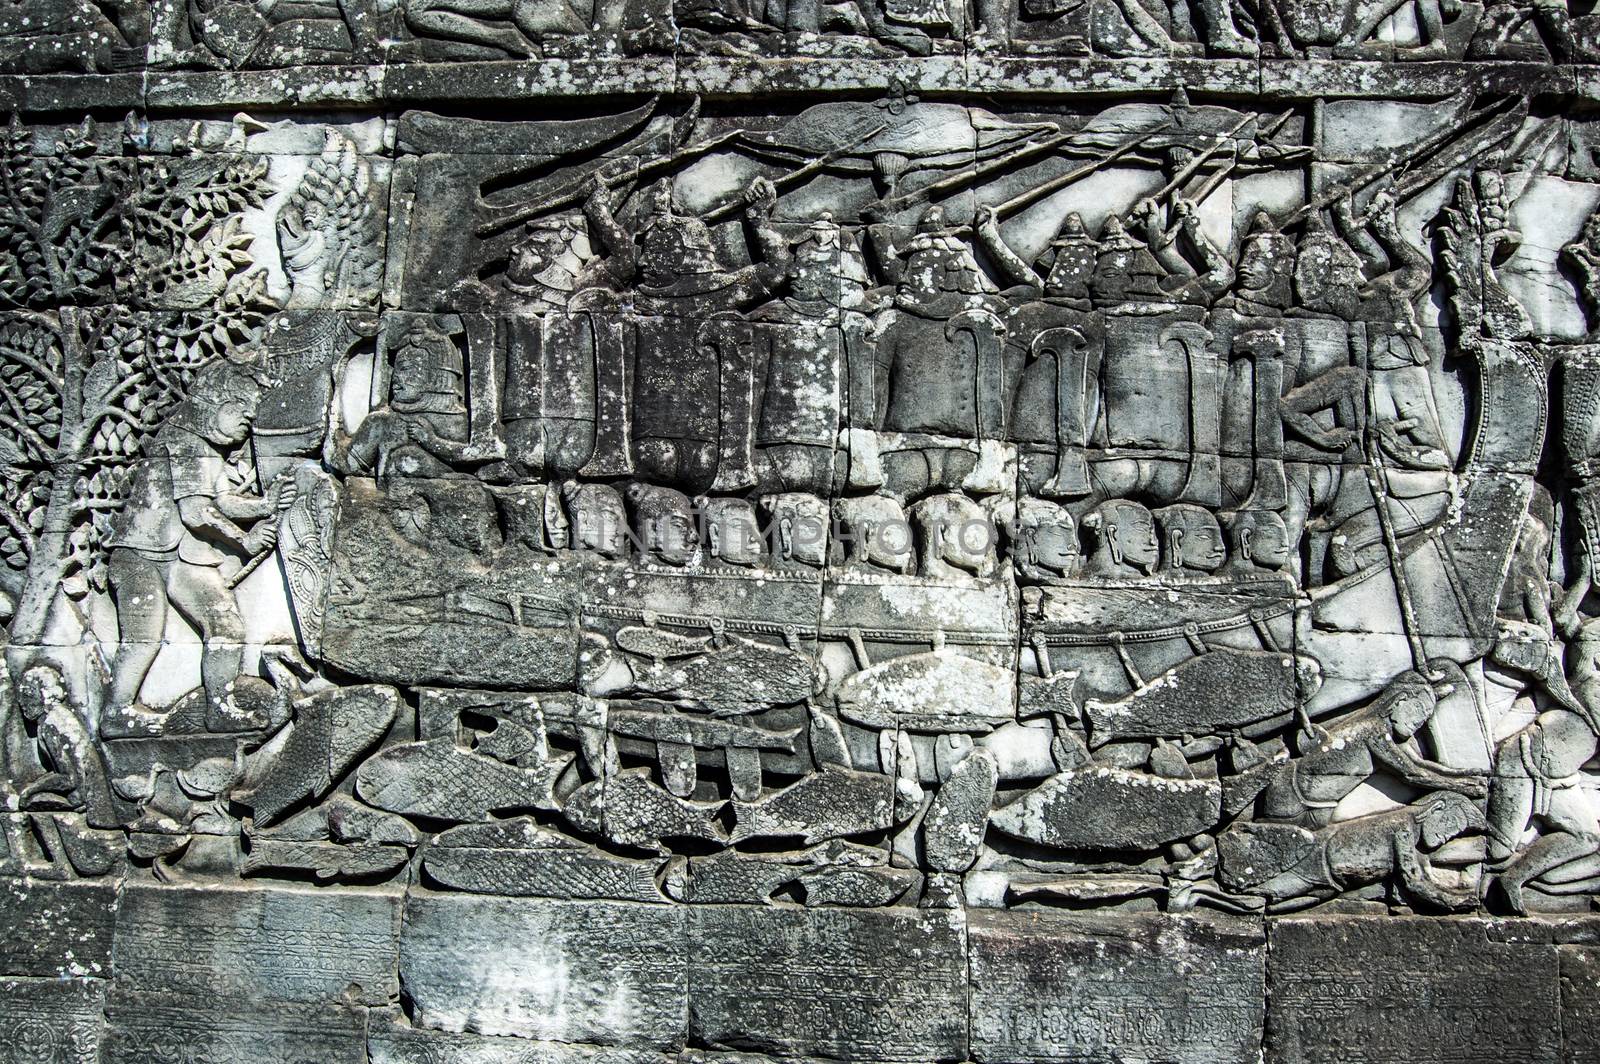 Ancient Khmer bas relief carving showing Cham fighters taking part in a naval battle on the Tonle Sap lake in Cambodia. Bayon Temple, Angkor Thom, Siem Reap, Cambodia.